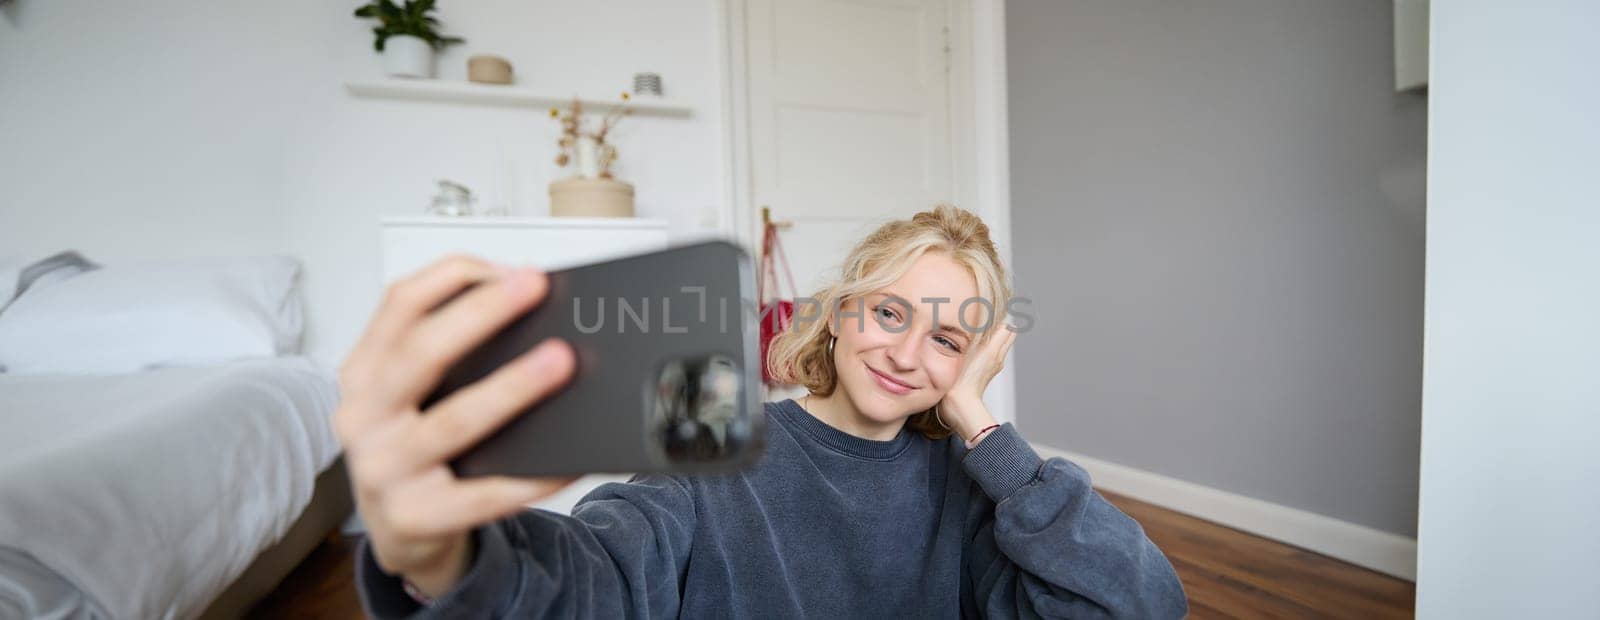 Portrait of young stylish girl sits on bedroom floor, takes selfies on her smartphone, posing for photo on social media app, smiling and looking happy at camera.